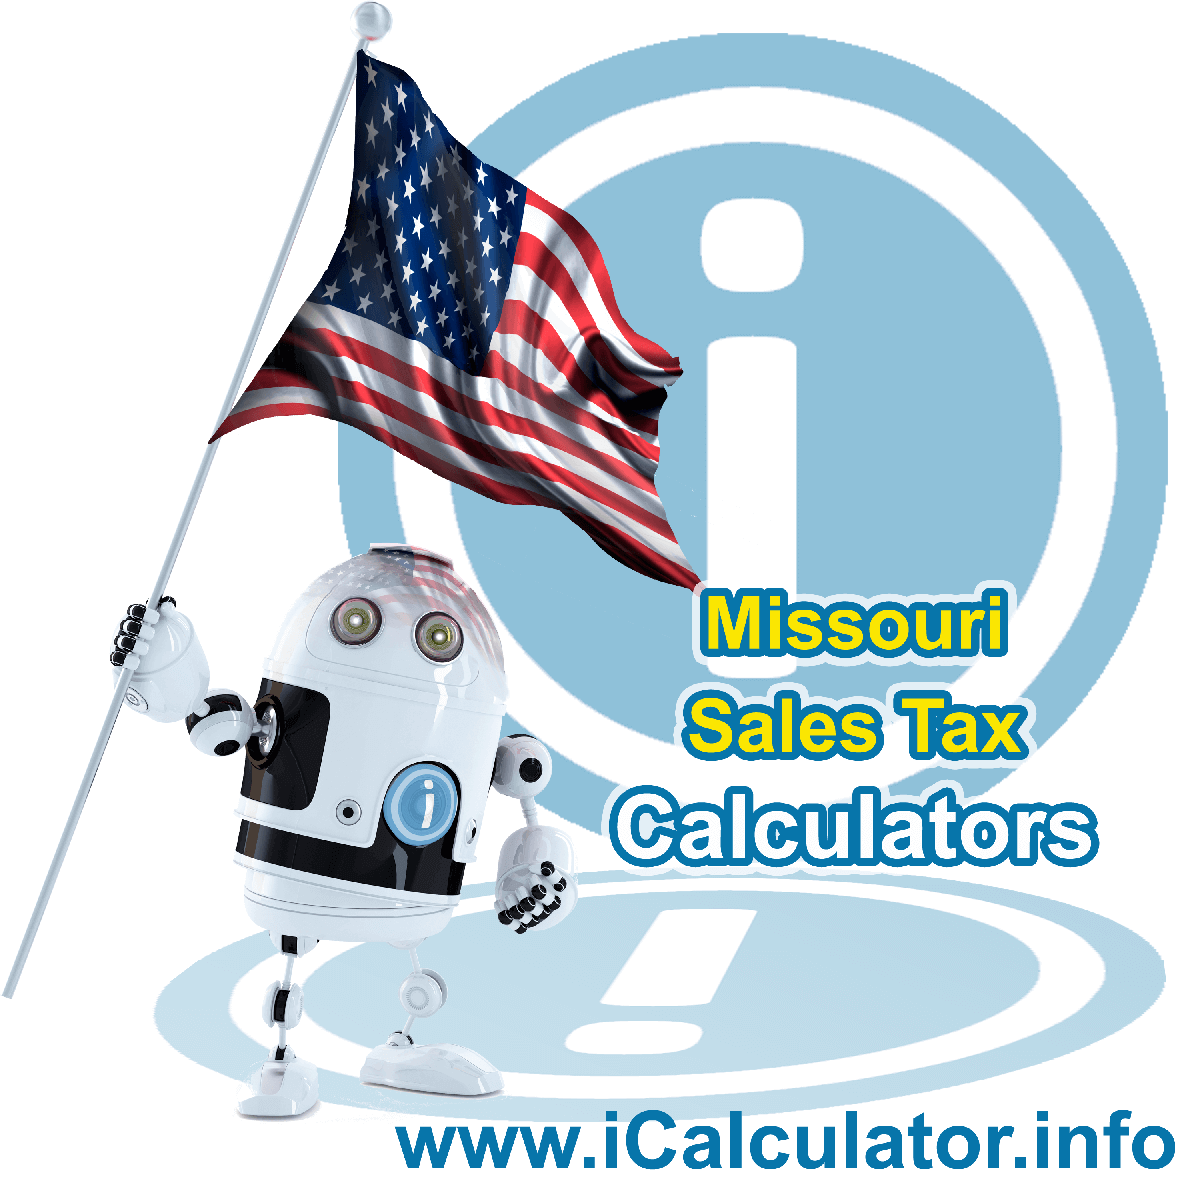 Missouri Sales Tax Comparison Calculator: This image illustrates a calculator robot comparing sales tax in Missouri manually using the Missouri Sales Tax Formula. You can use this information to compare Sales Tax manually or use the Missouri Sales Tax Comparison Calculator to calculate and compare Missouri sales tax online.